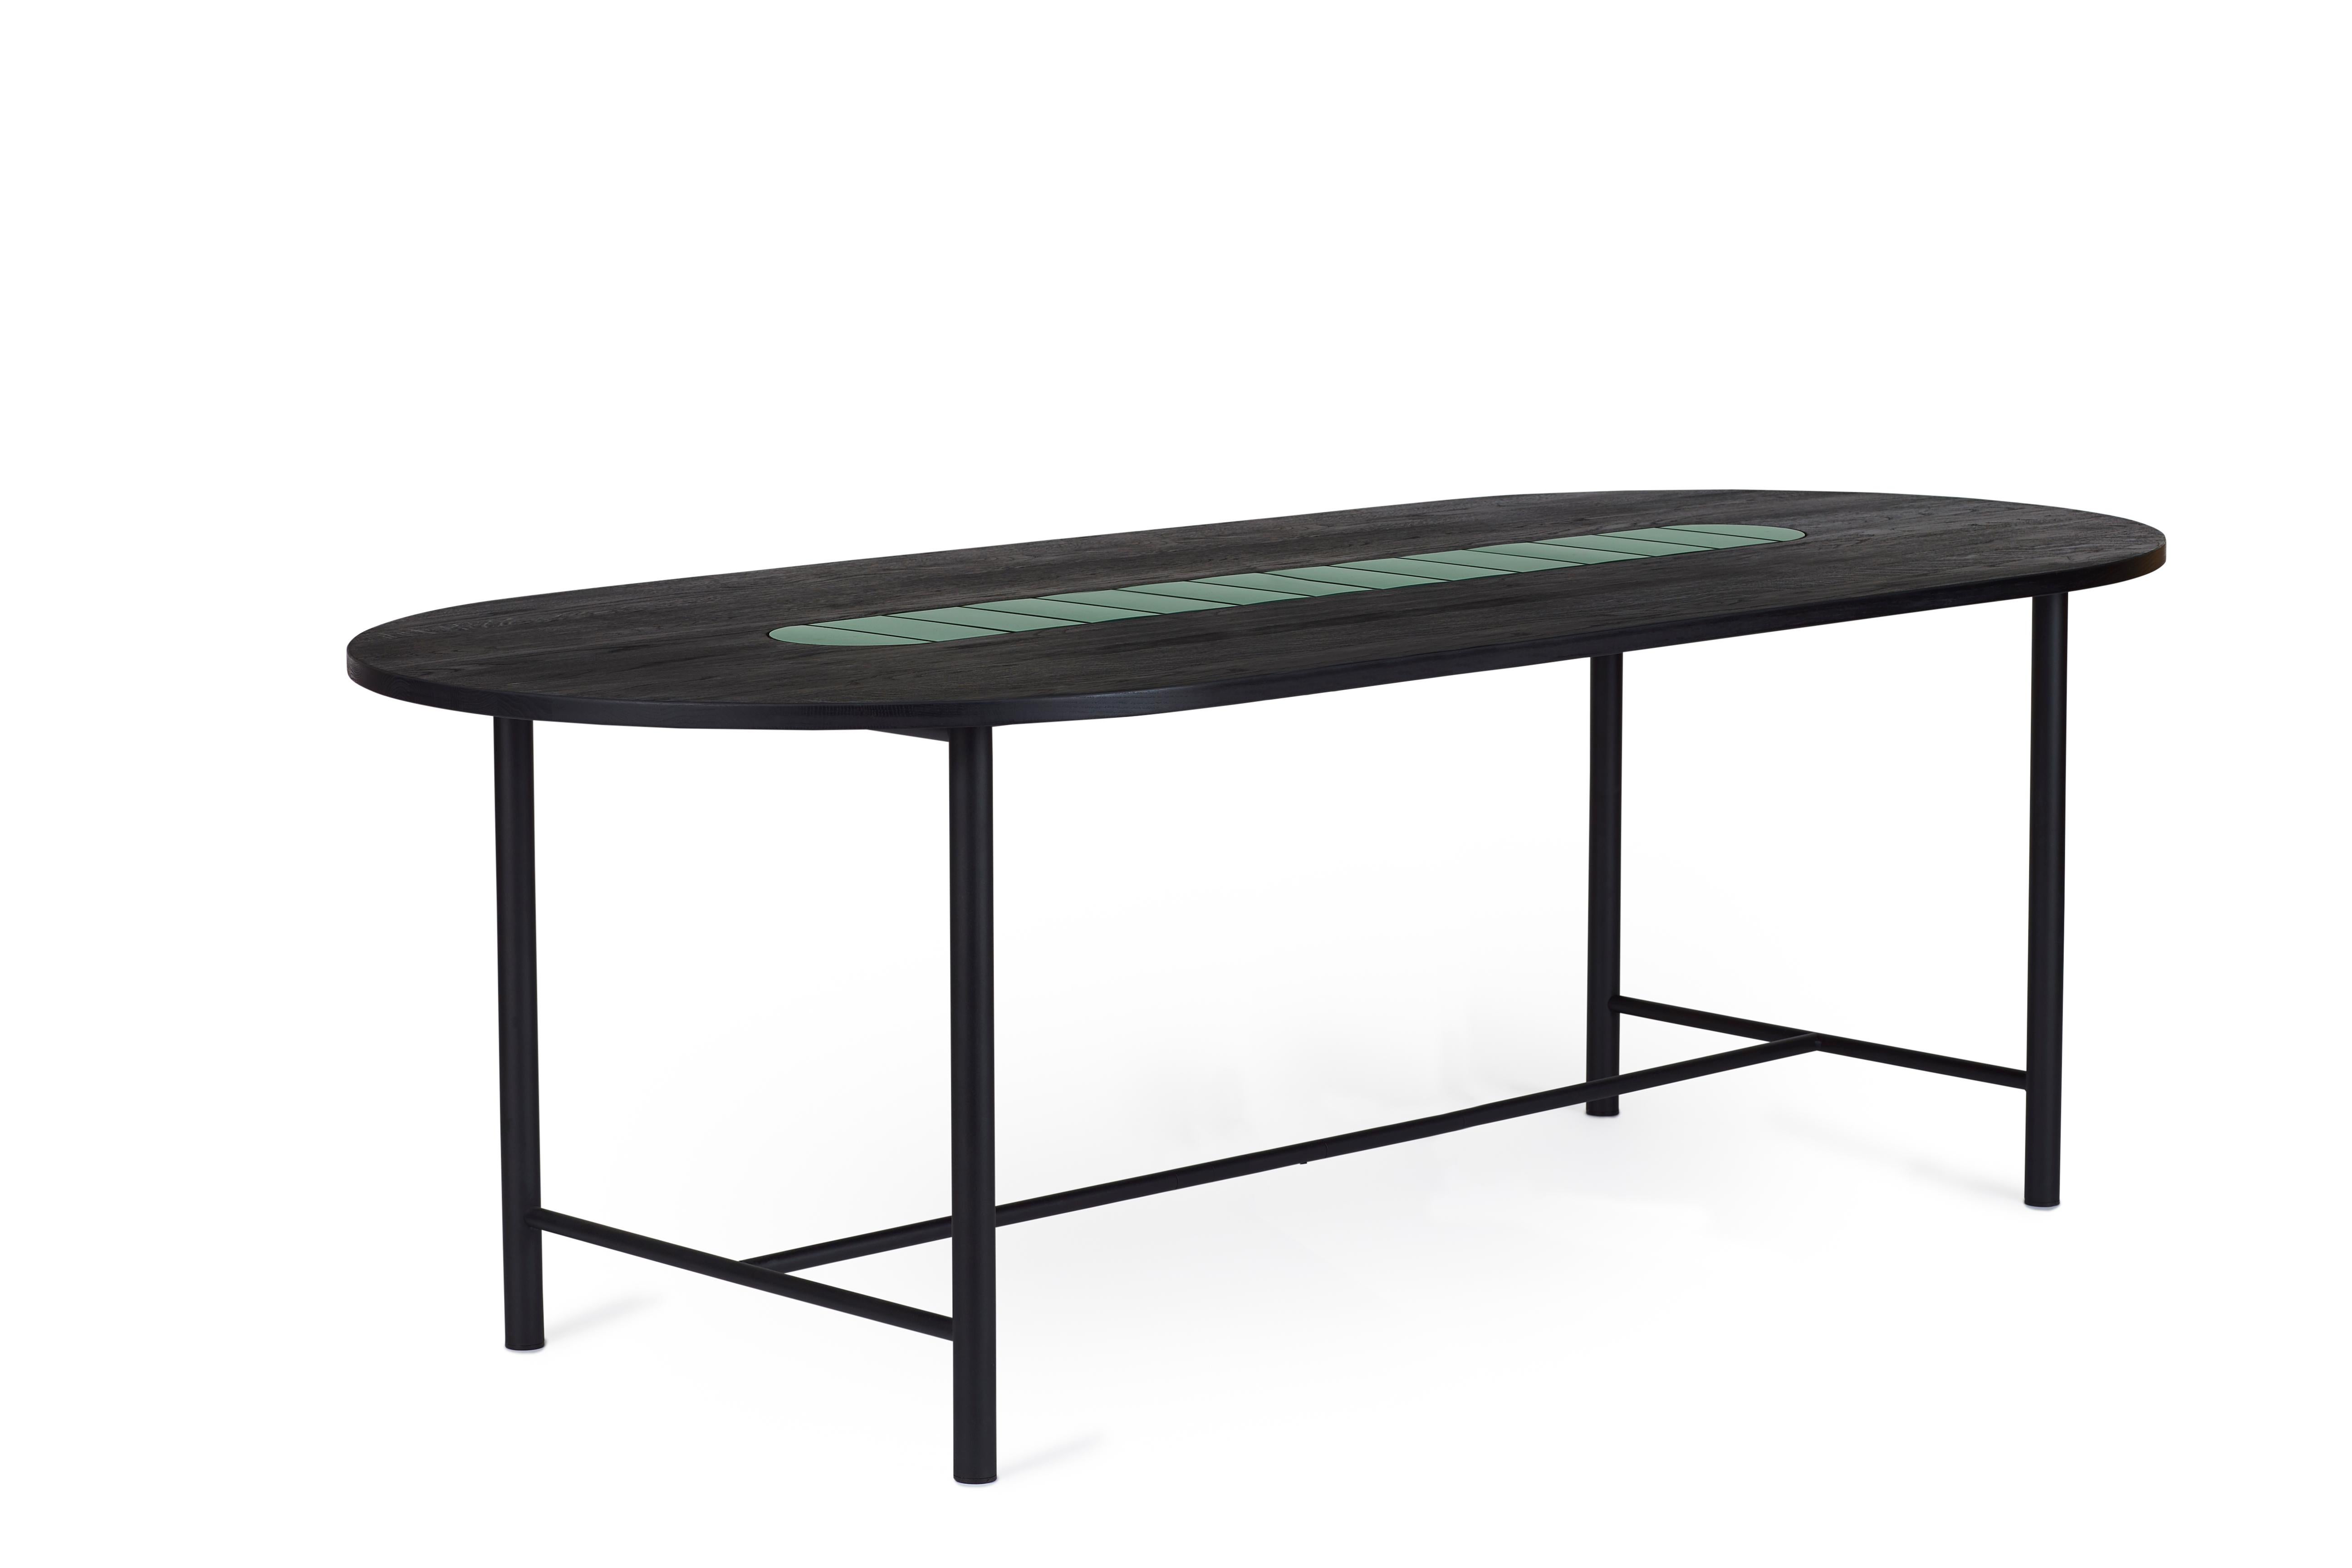 For Sale: Green (Forest green) Be My Guest Large Dining Table, by Charlotte Høncke from Warm Nordic 2